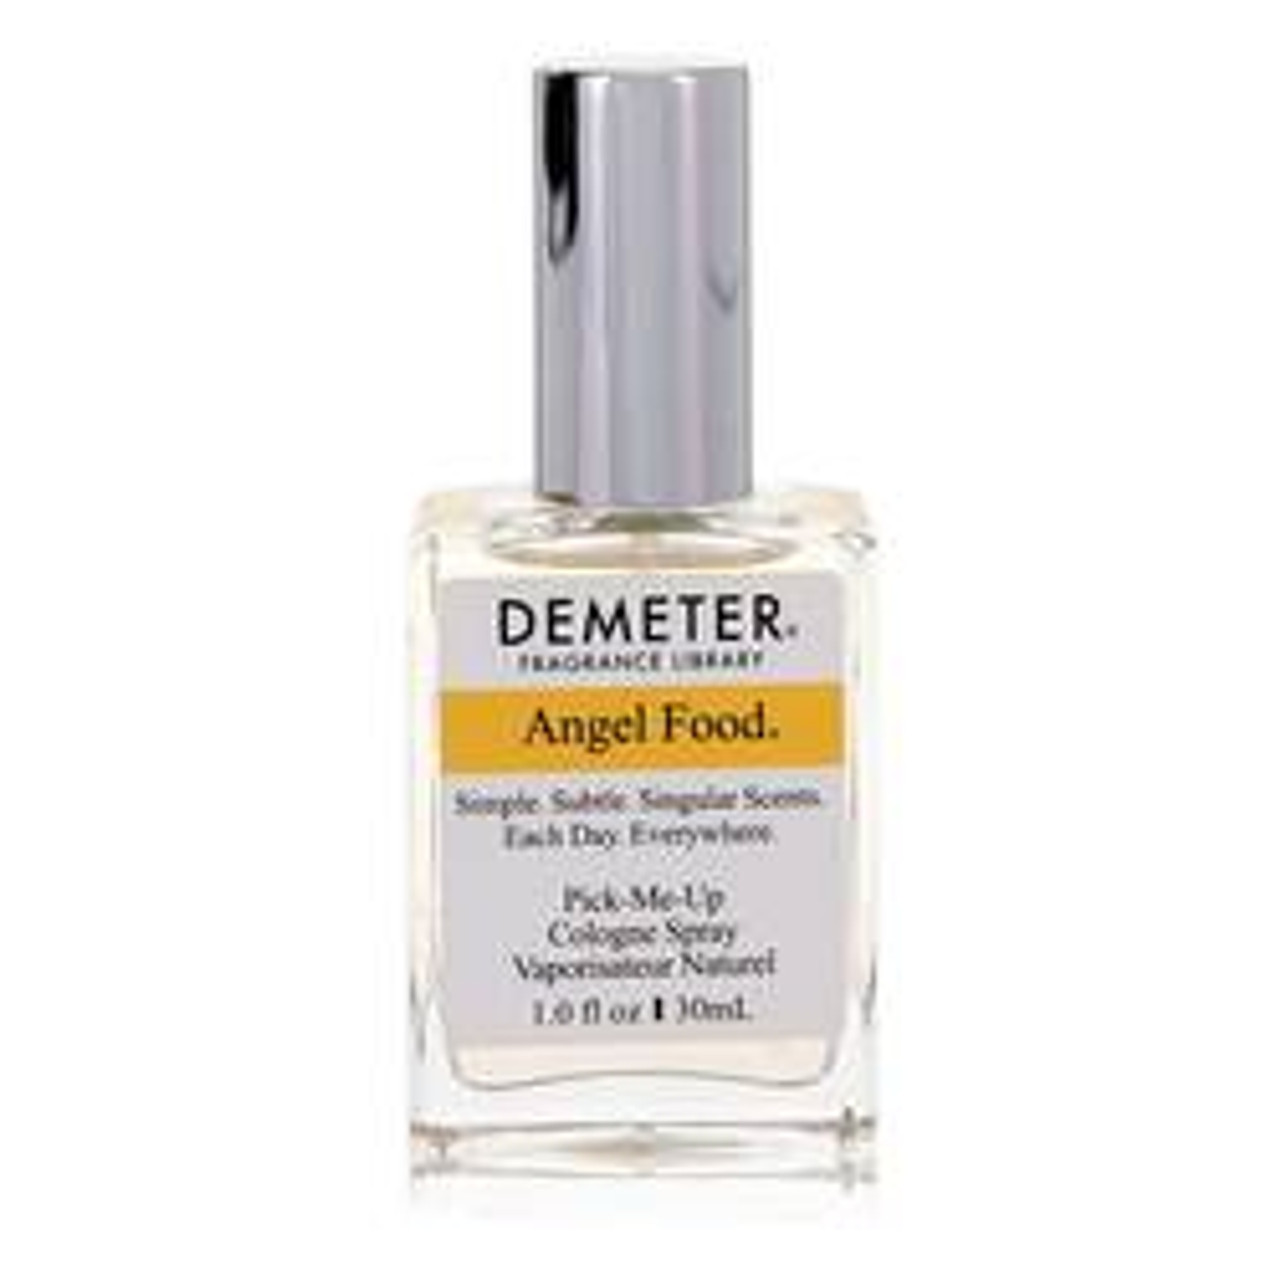 Demeter Angel Food Perfume By Demeter Cologne Spray 1 oz for Women - [From 59.00 - Choose pk Qty ] - *Ships from Miami